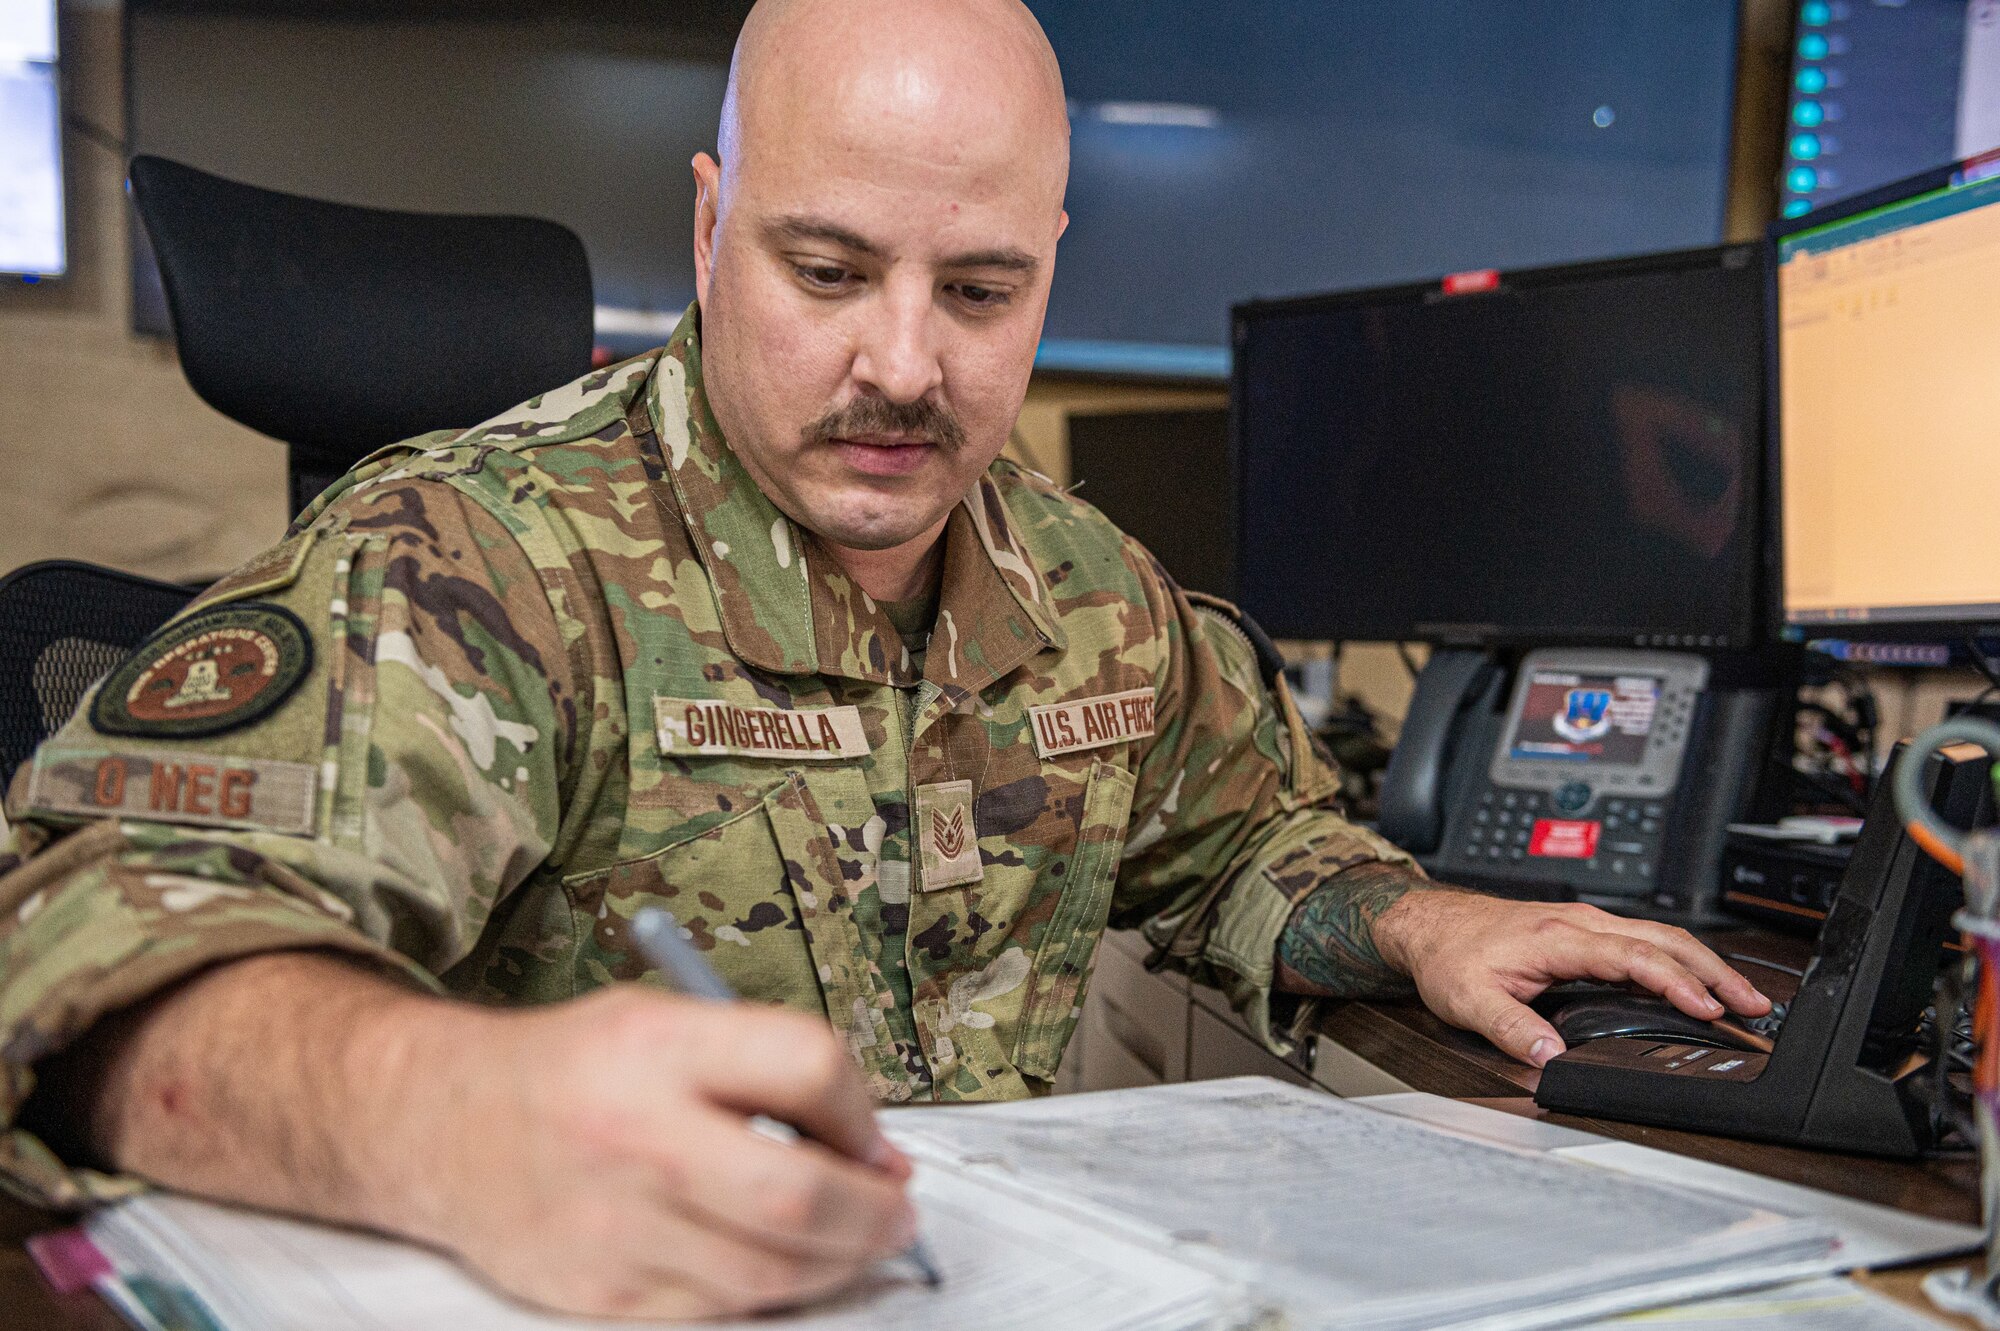 The base command and control operations center is the central command point for mission operations. It’s the job of airmen within to ensure operations and communications run efficiently and effectively no matter what.